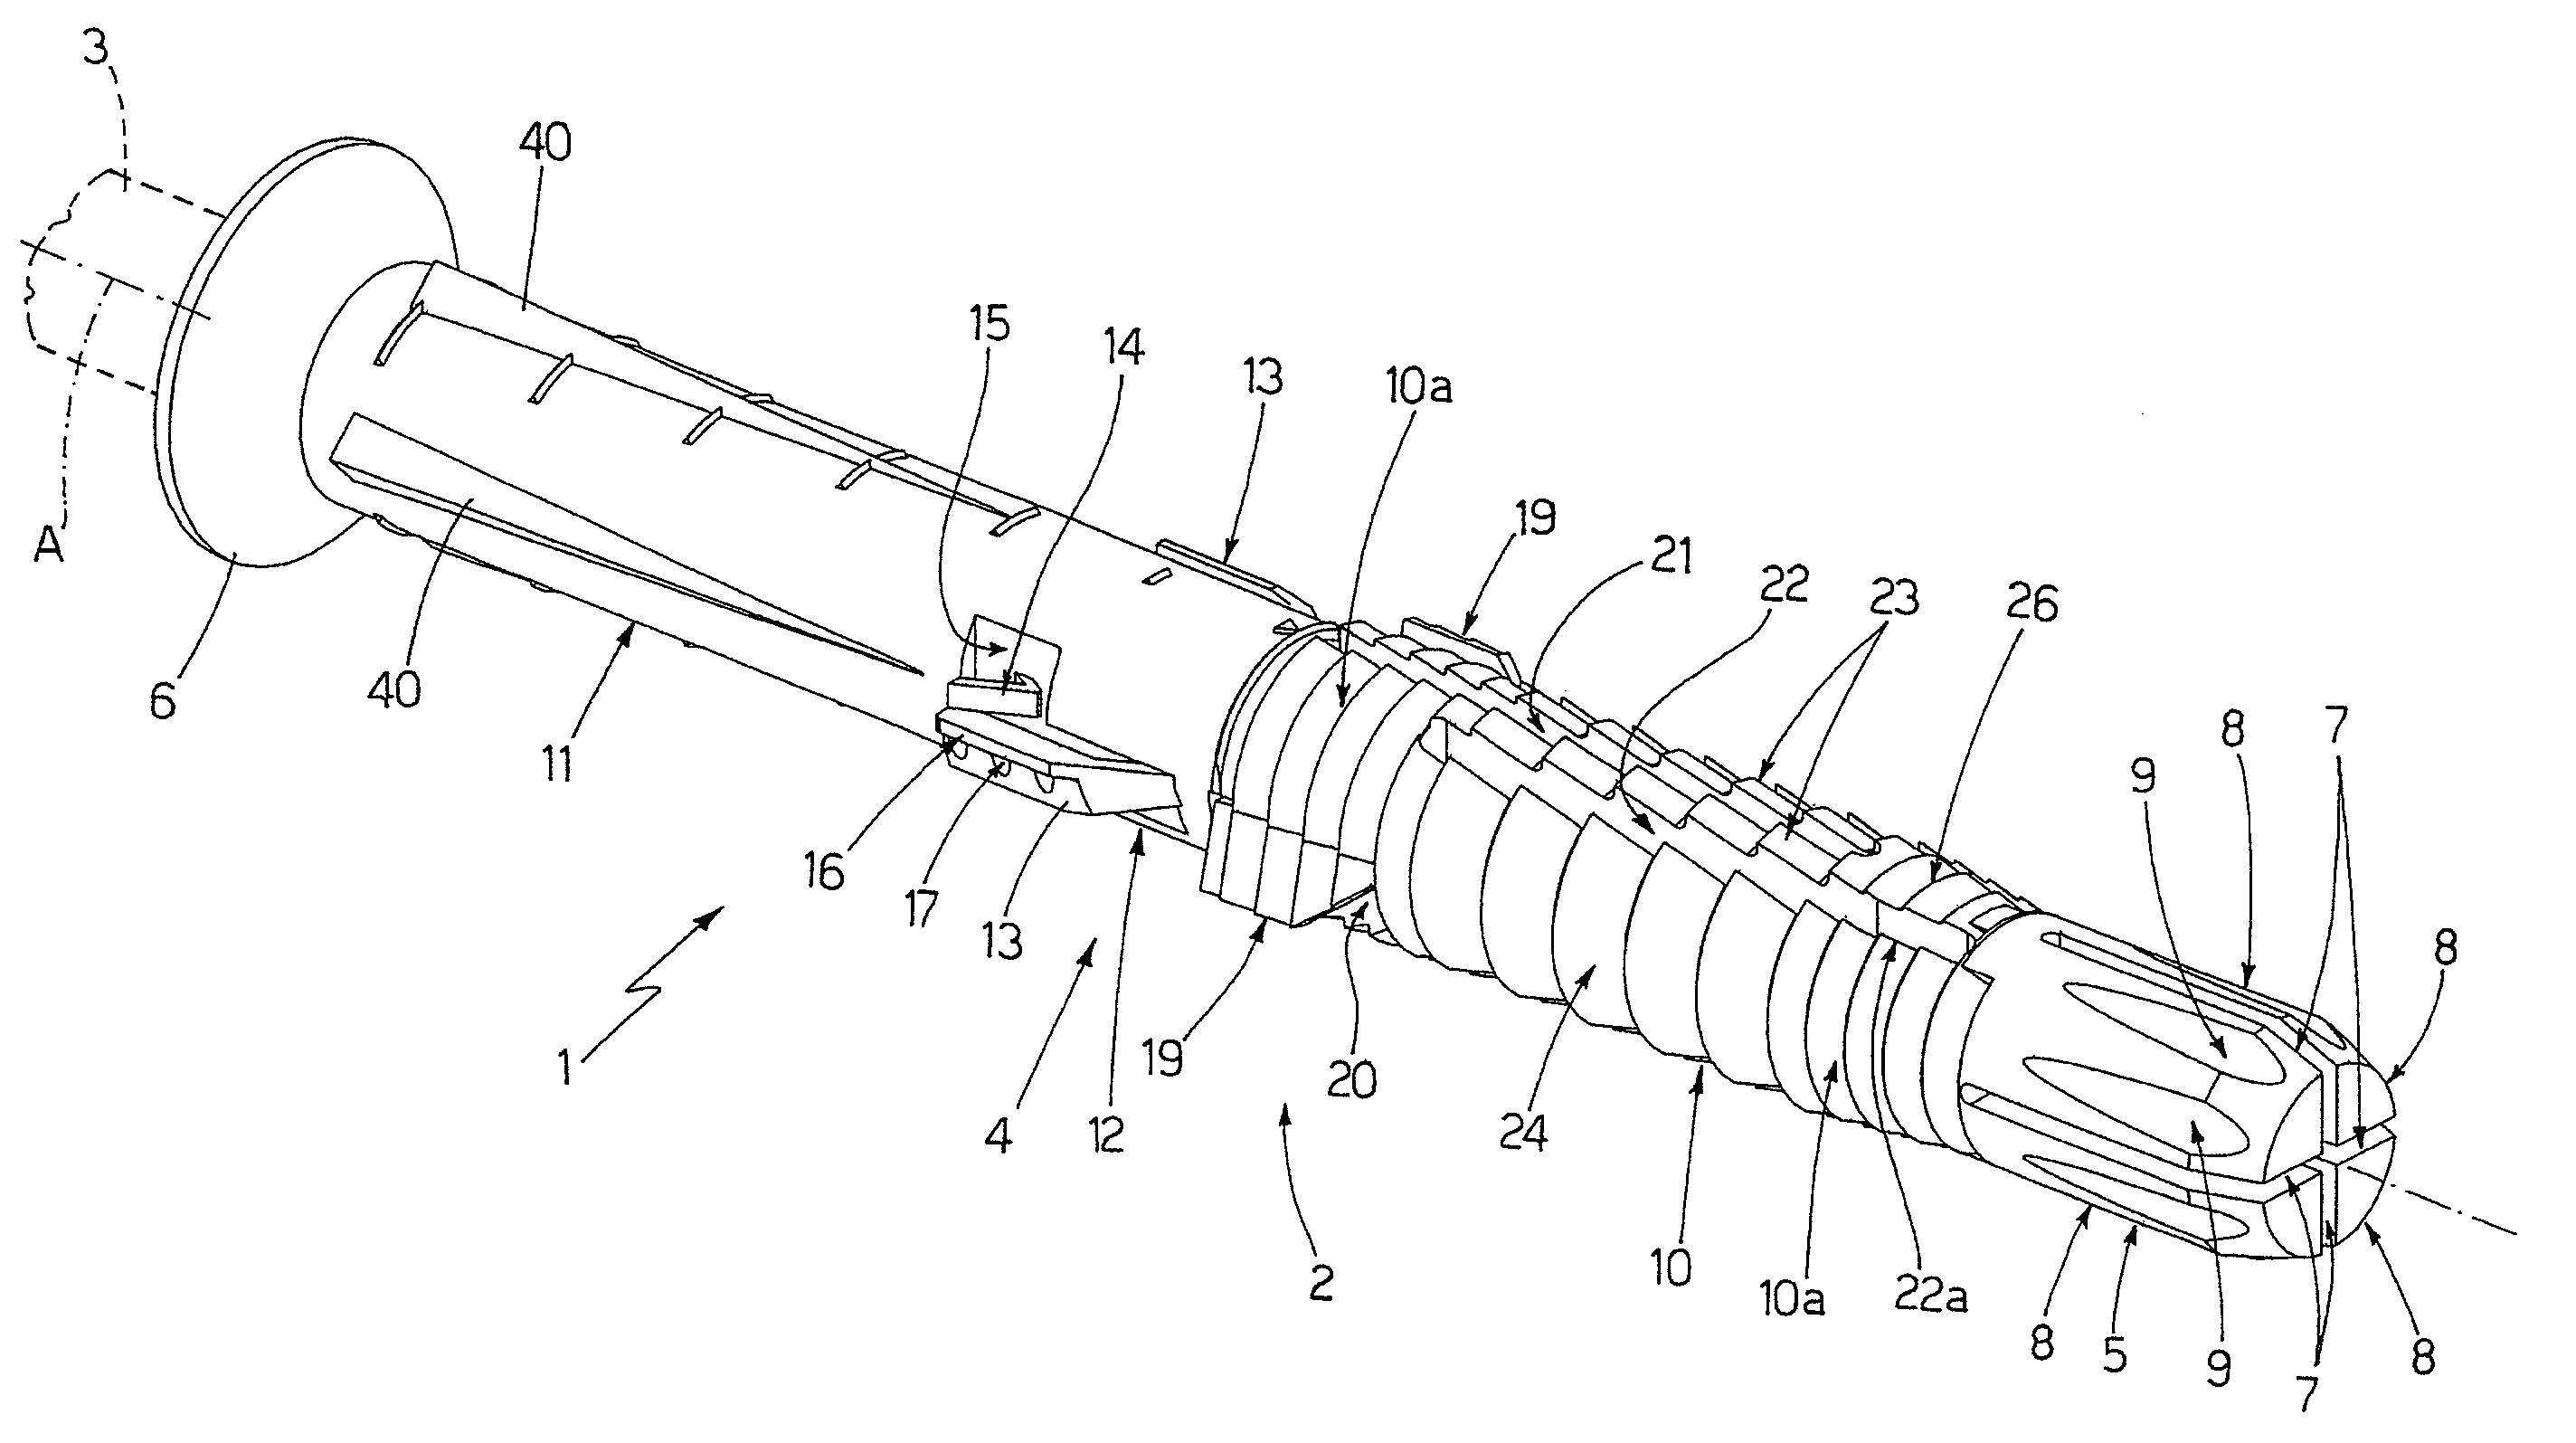 Anchor device of wooden or metal structures to a wall